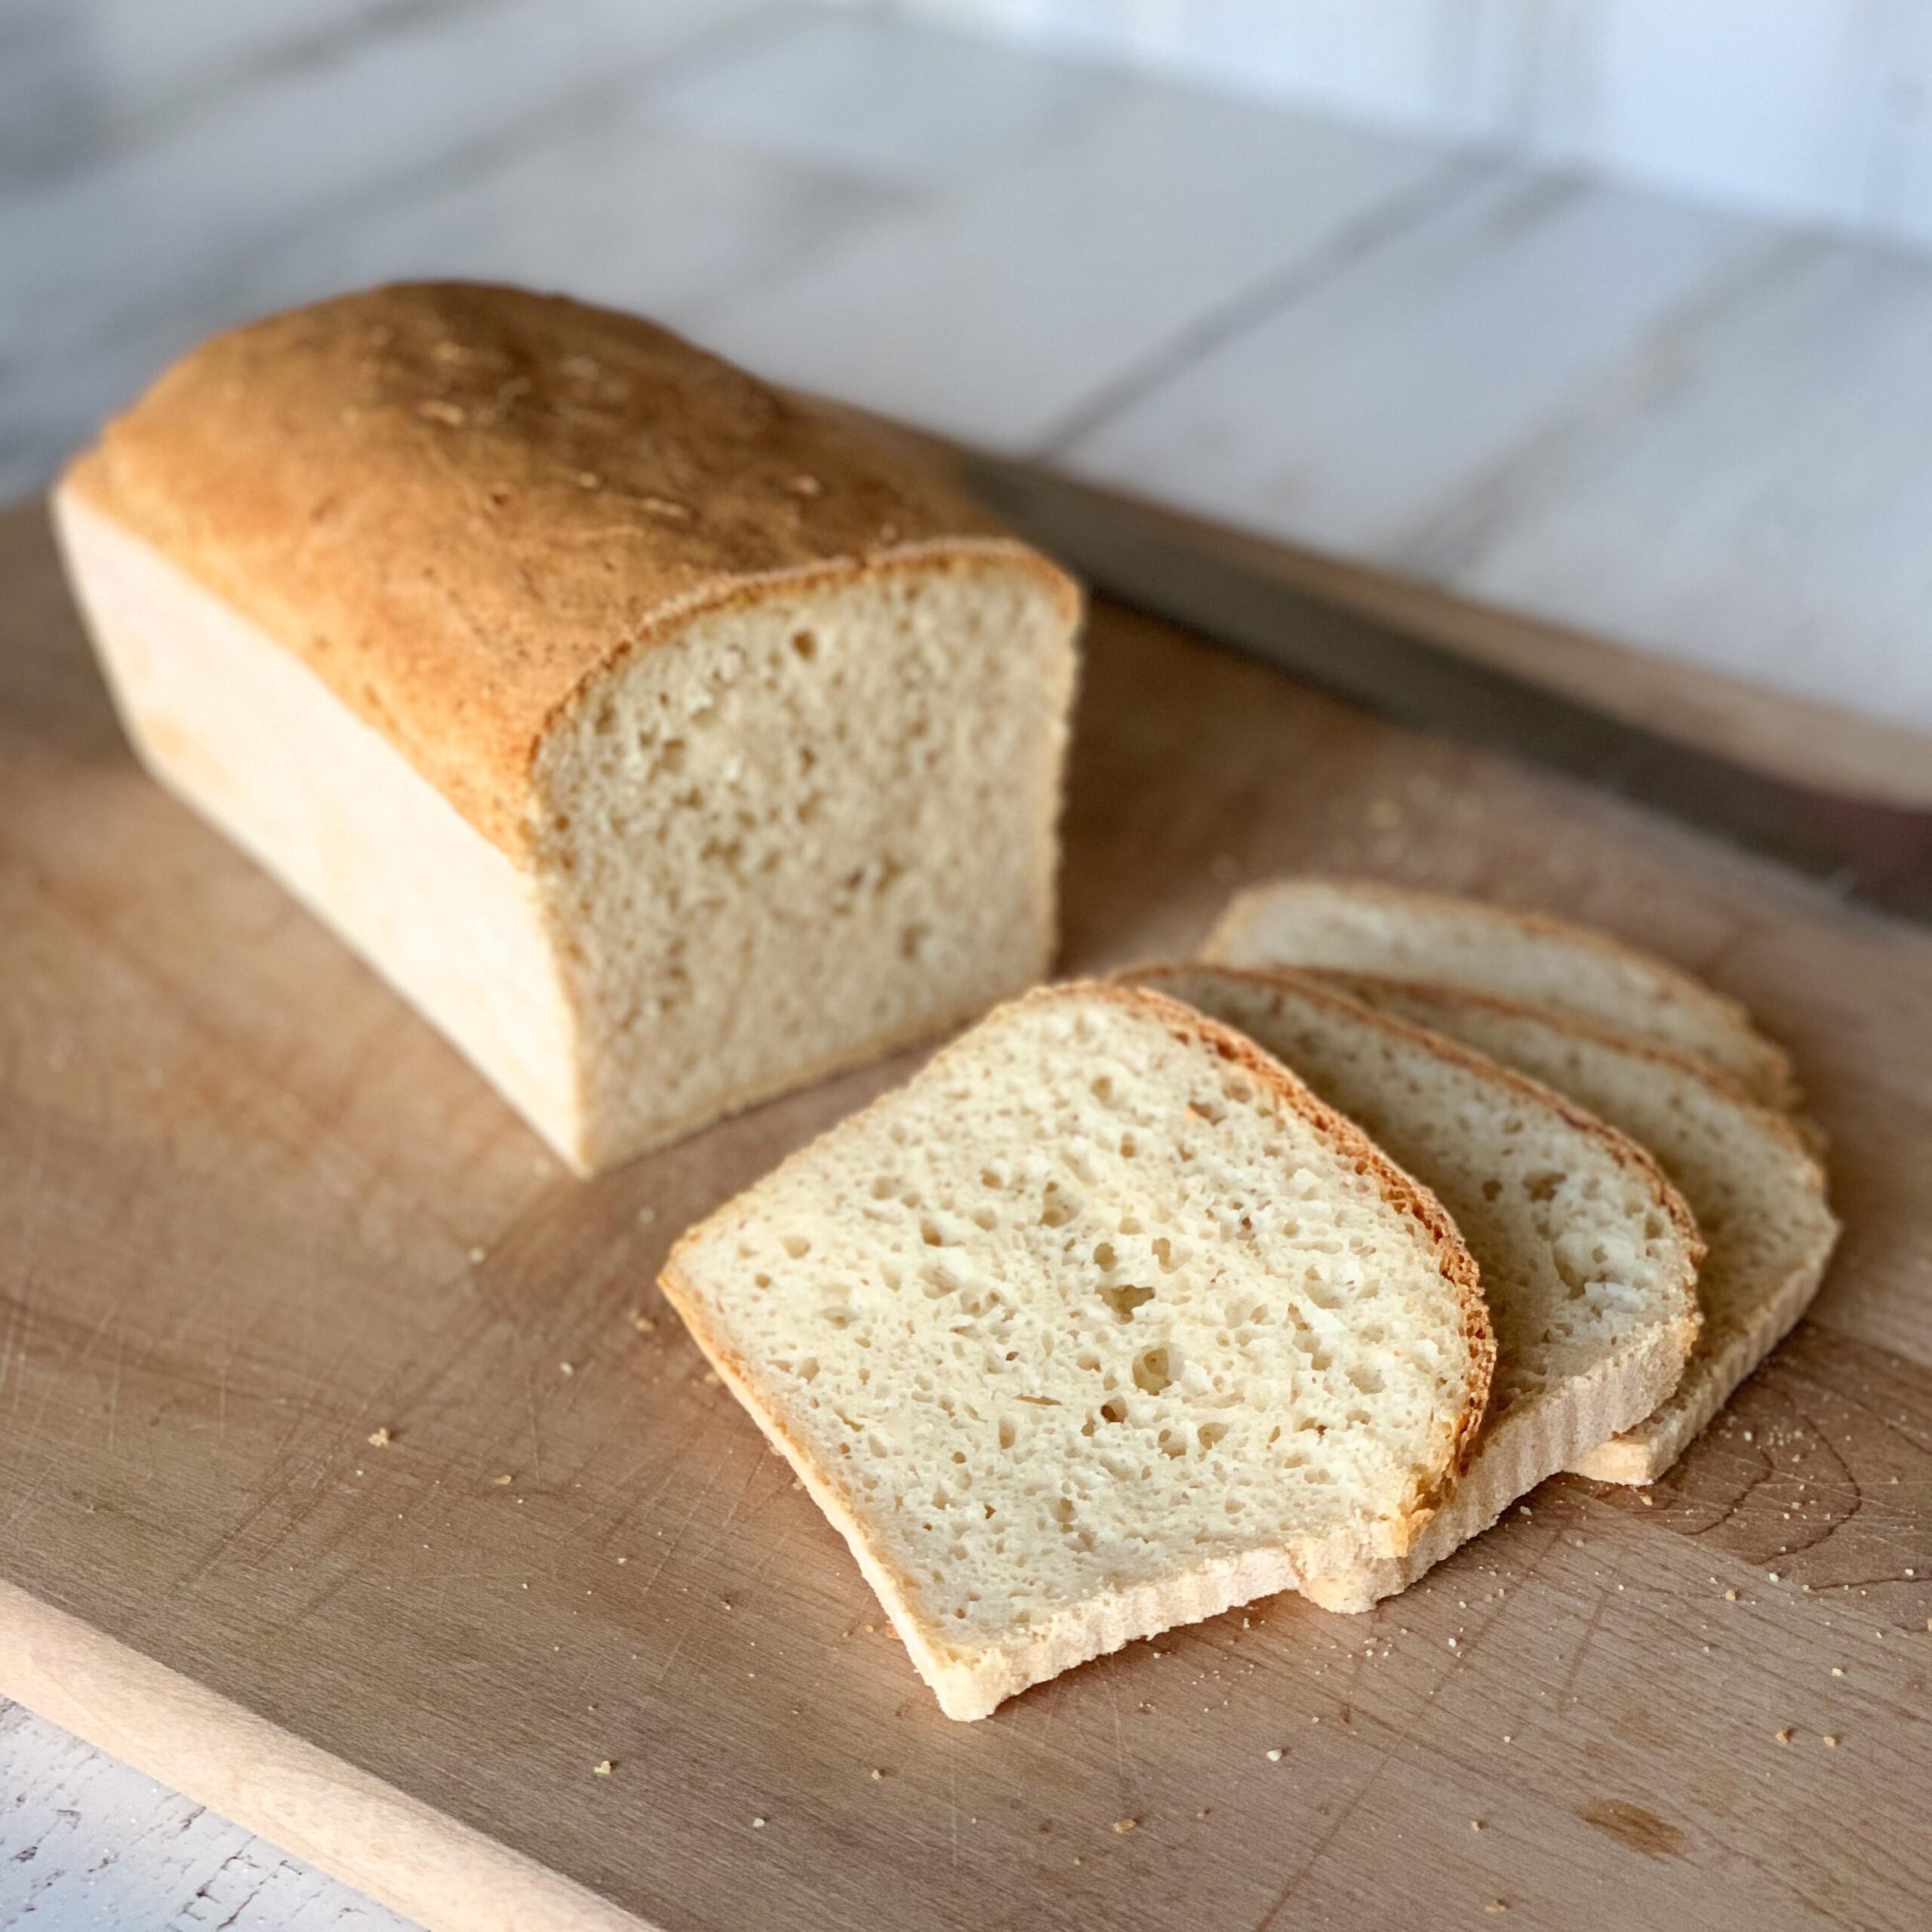  Trust us, this gluten-free white bread is a game-changer!